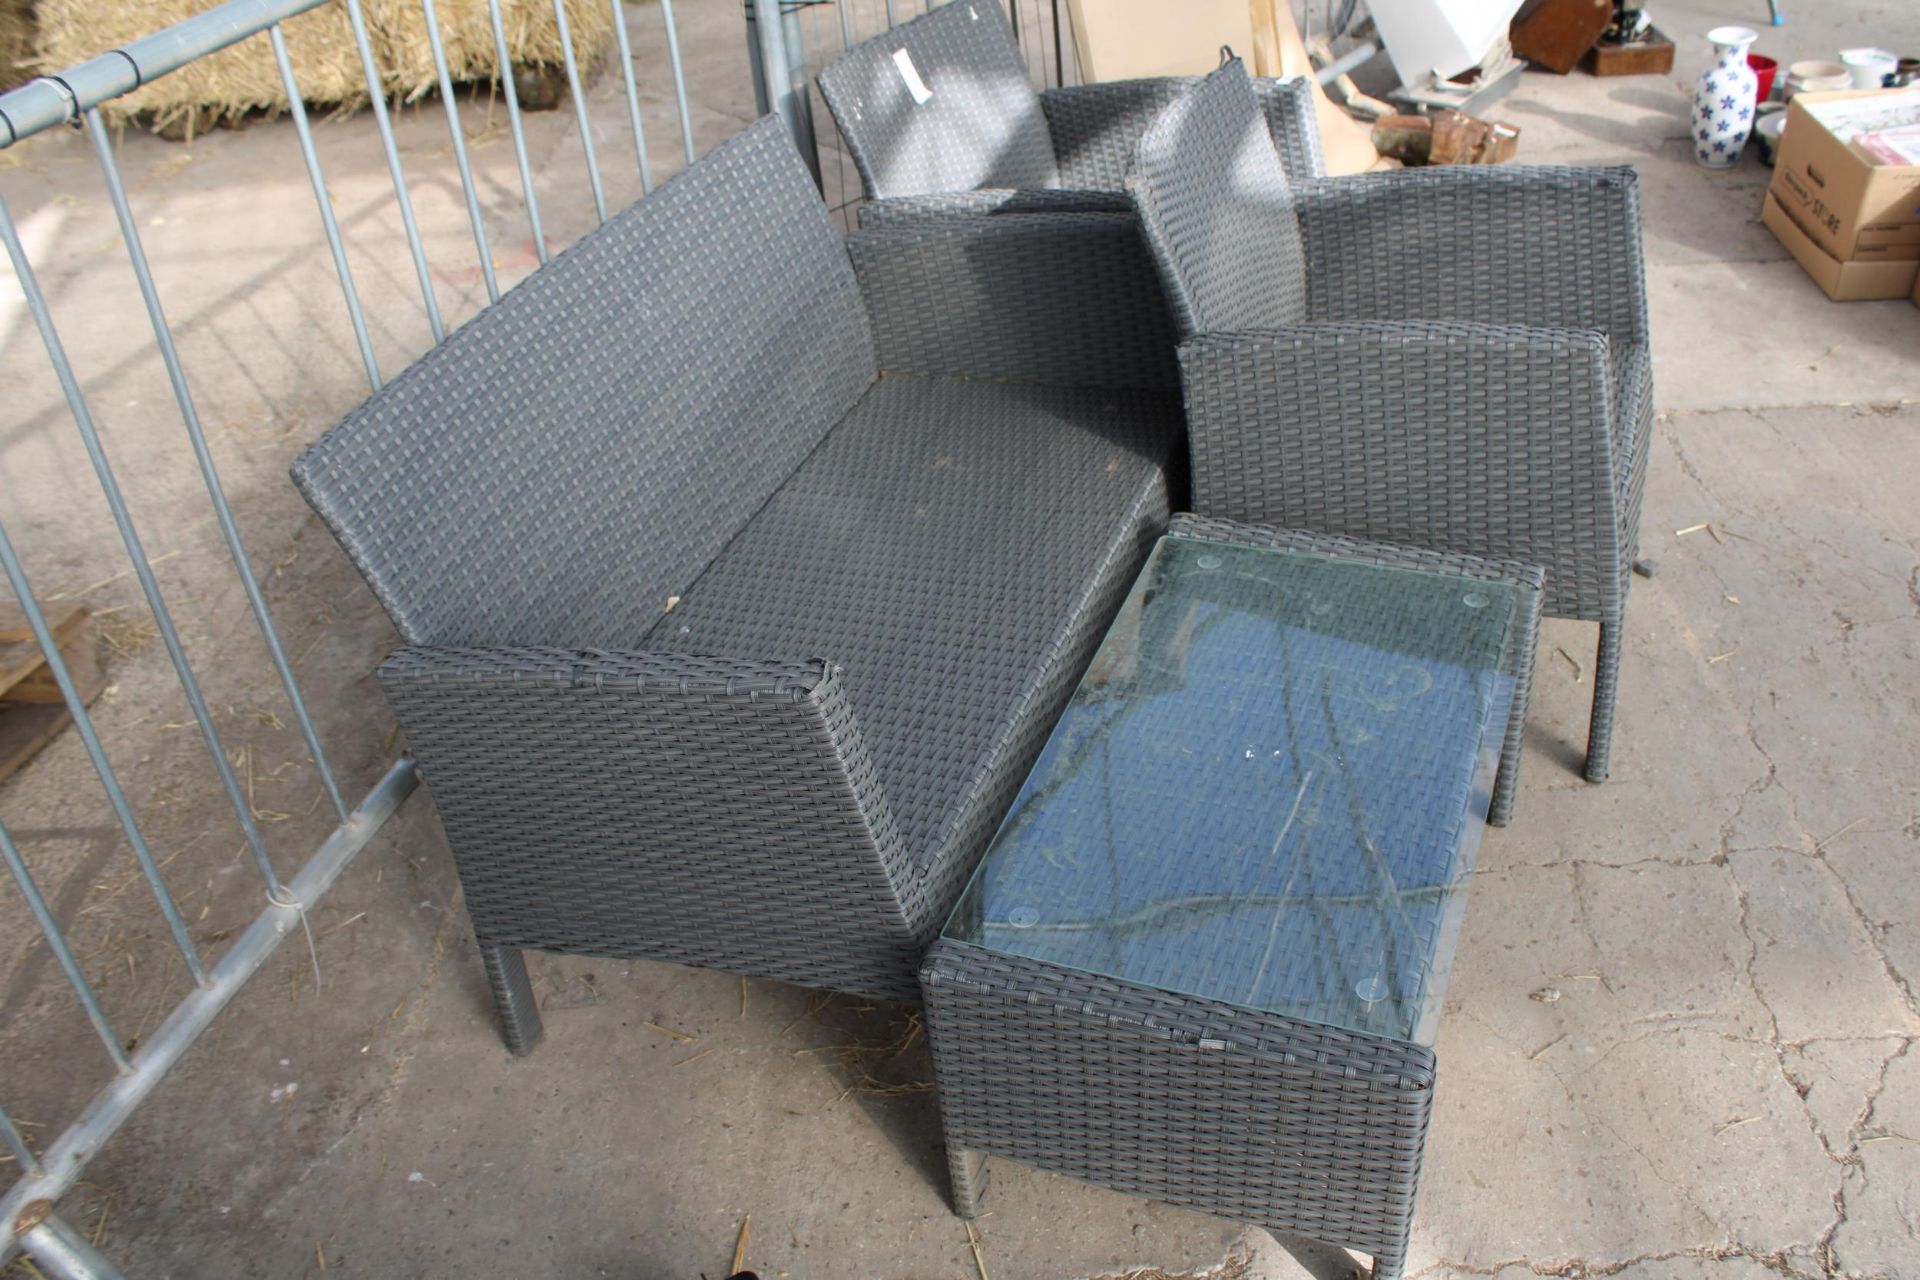 A RATTAN GARDEN FURNITURE SET COMPRISING OF A TWO SEATER BENCH, TWO CHAIRS AND A COFFEE TABLE - Image 3 of 3